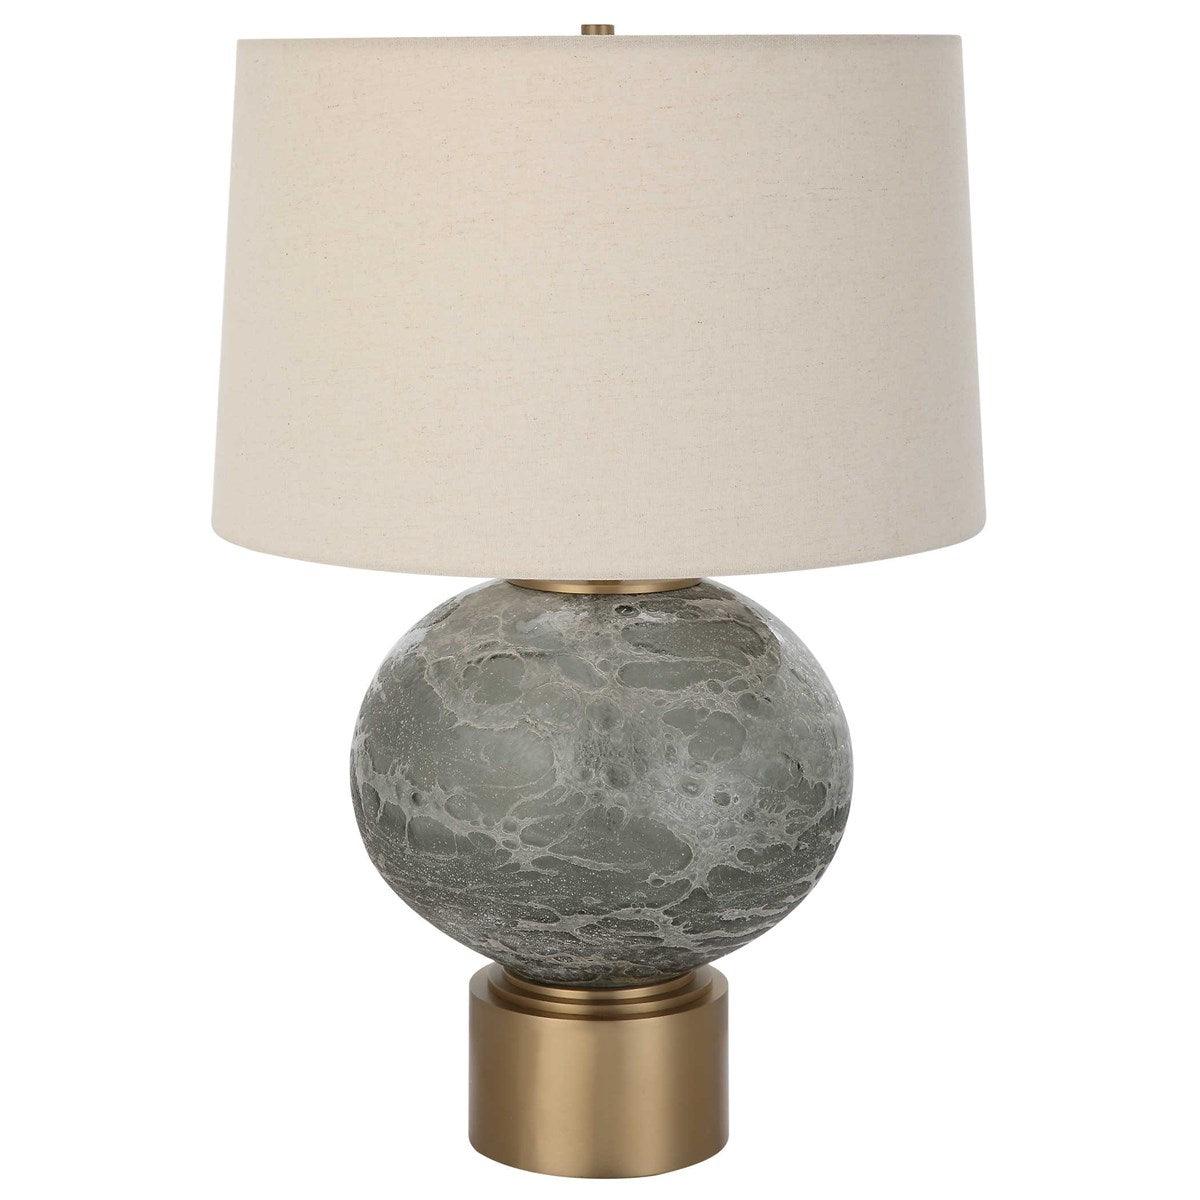 The Uttermost - Lunia Table Lamp - 30200-1 | Montreal Lighting & Hardware